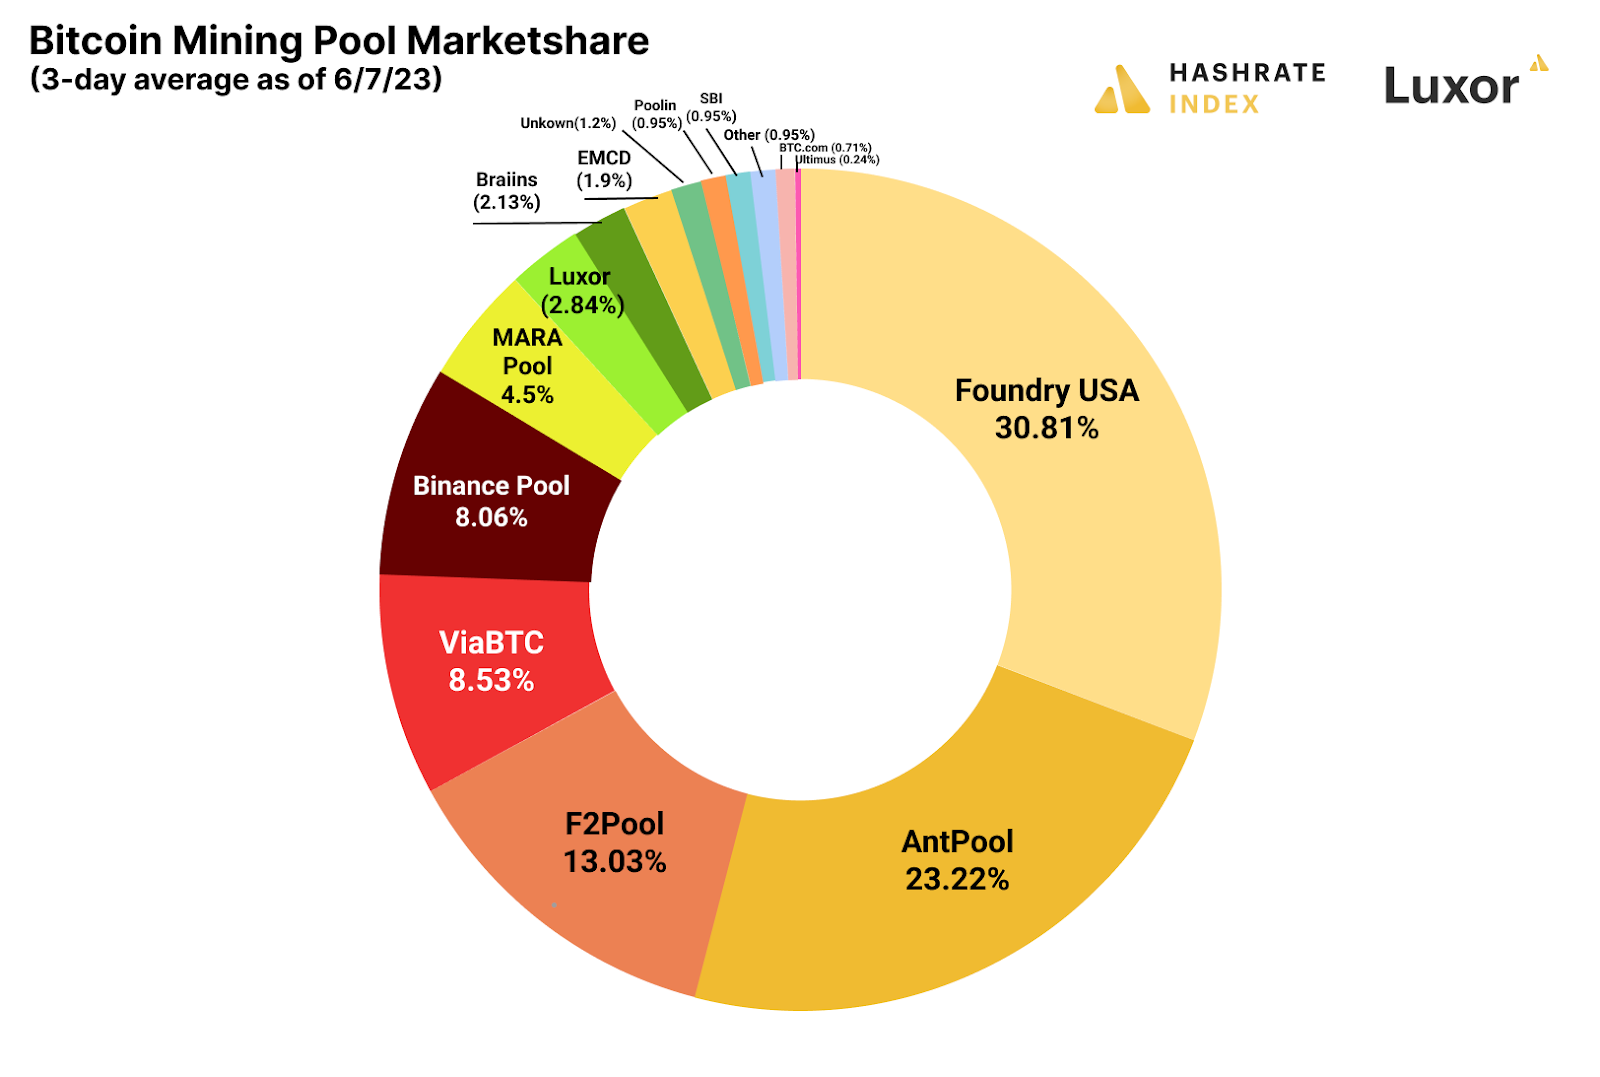 Bitcoin mining pools 3-day block average ranking (as of June 7, 2023) | Source: Hashrate Index